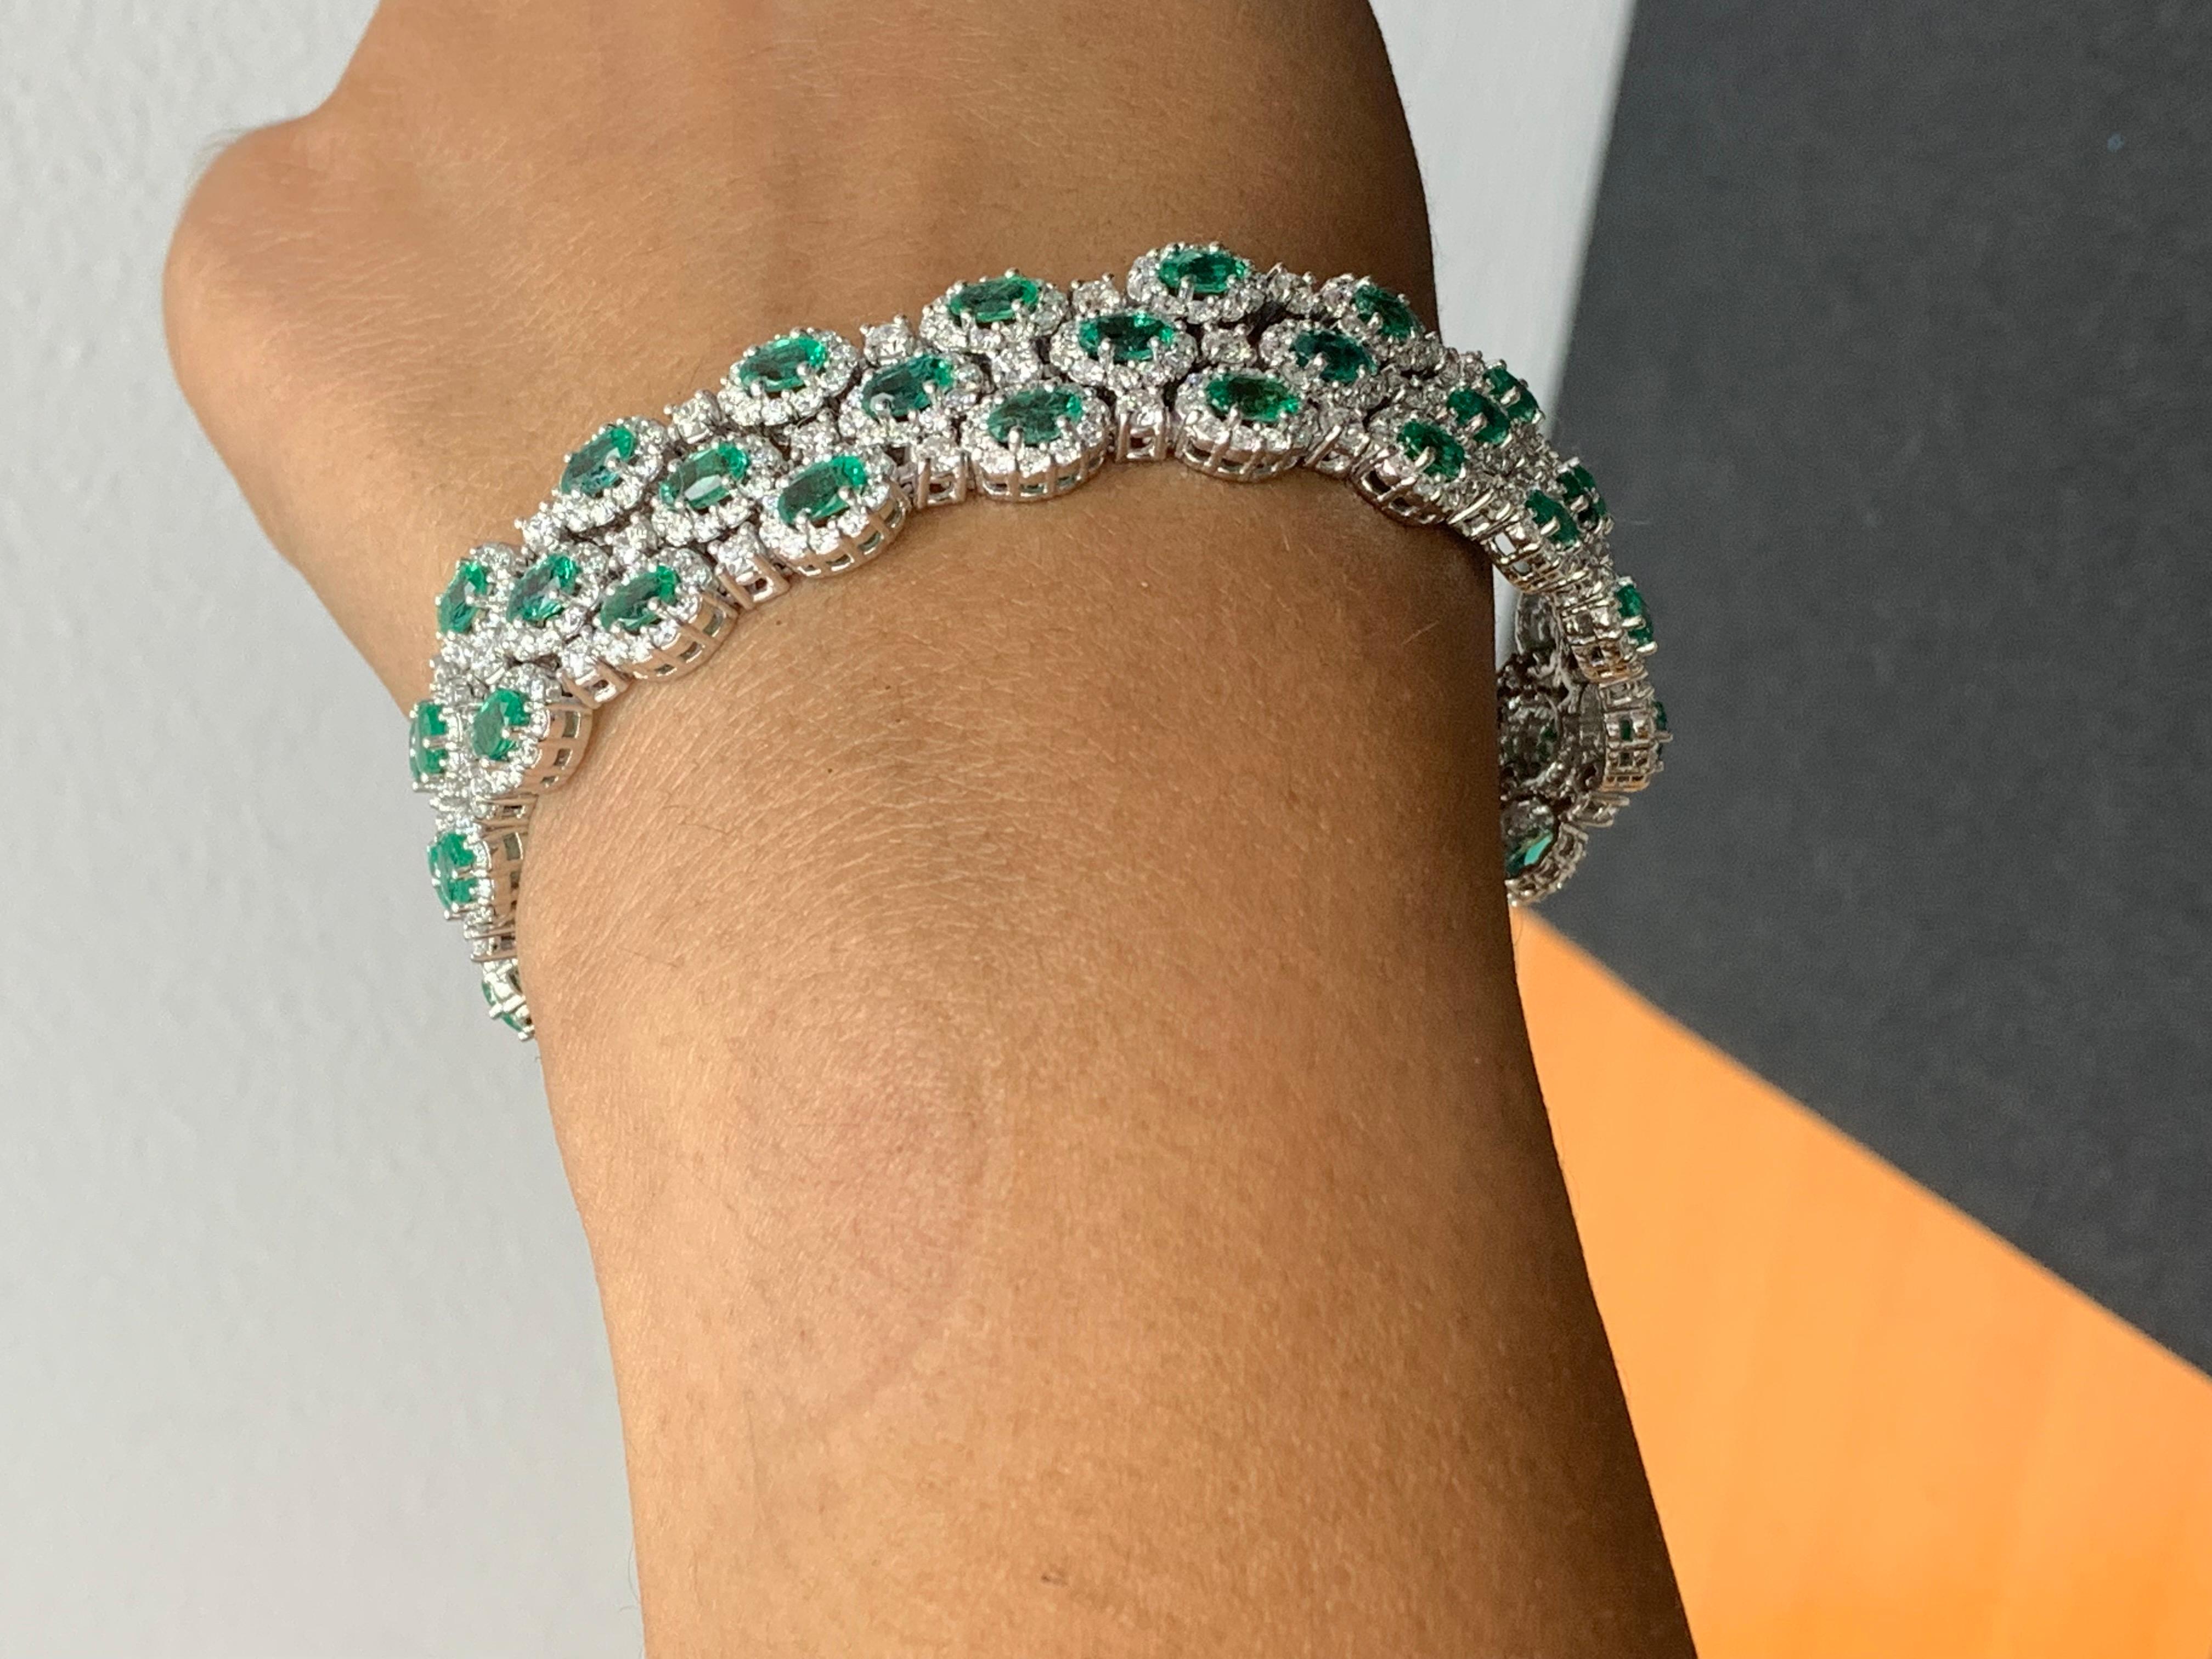 10.95 Carat Oval Cut Emerald and Diamond 3 Row Bracelet in 14K White Gold For Sale 6